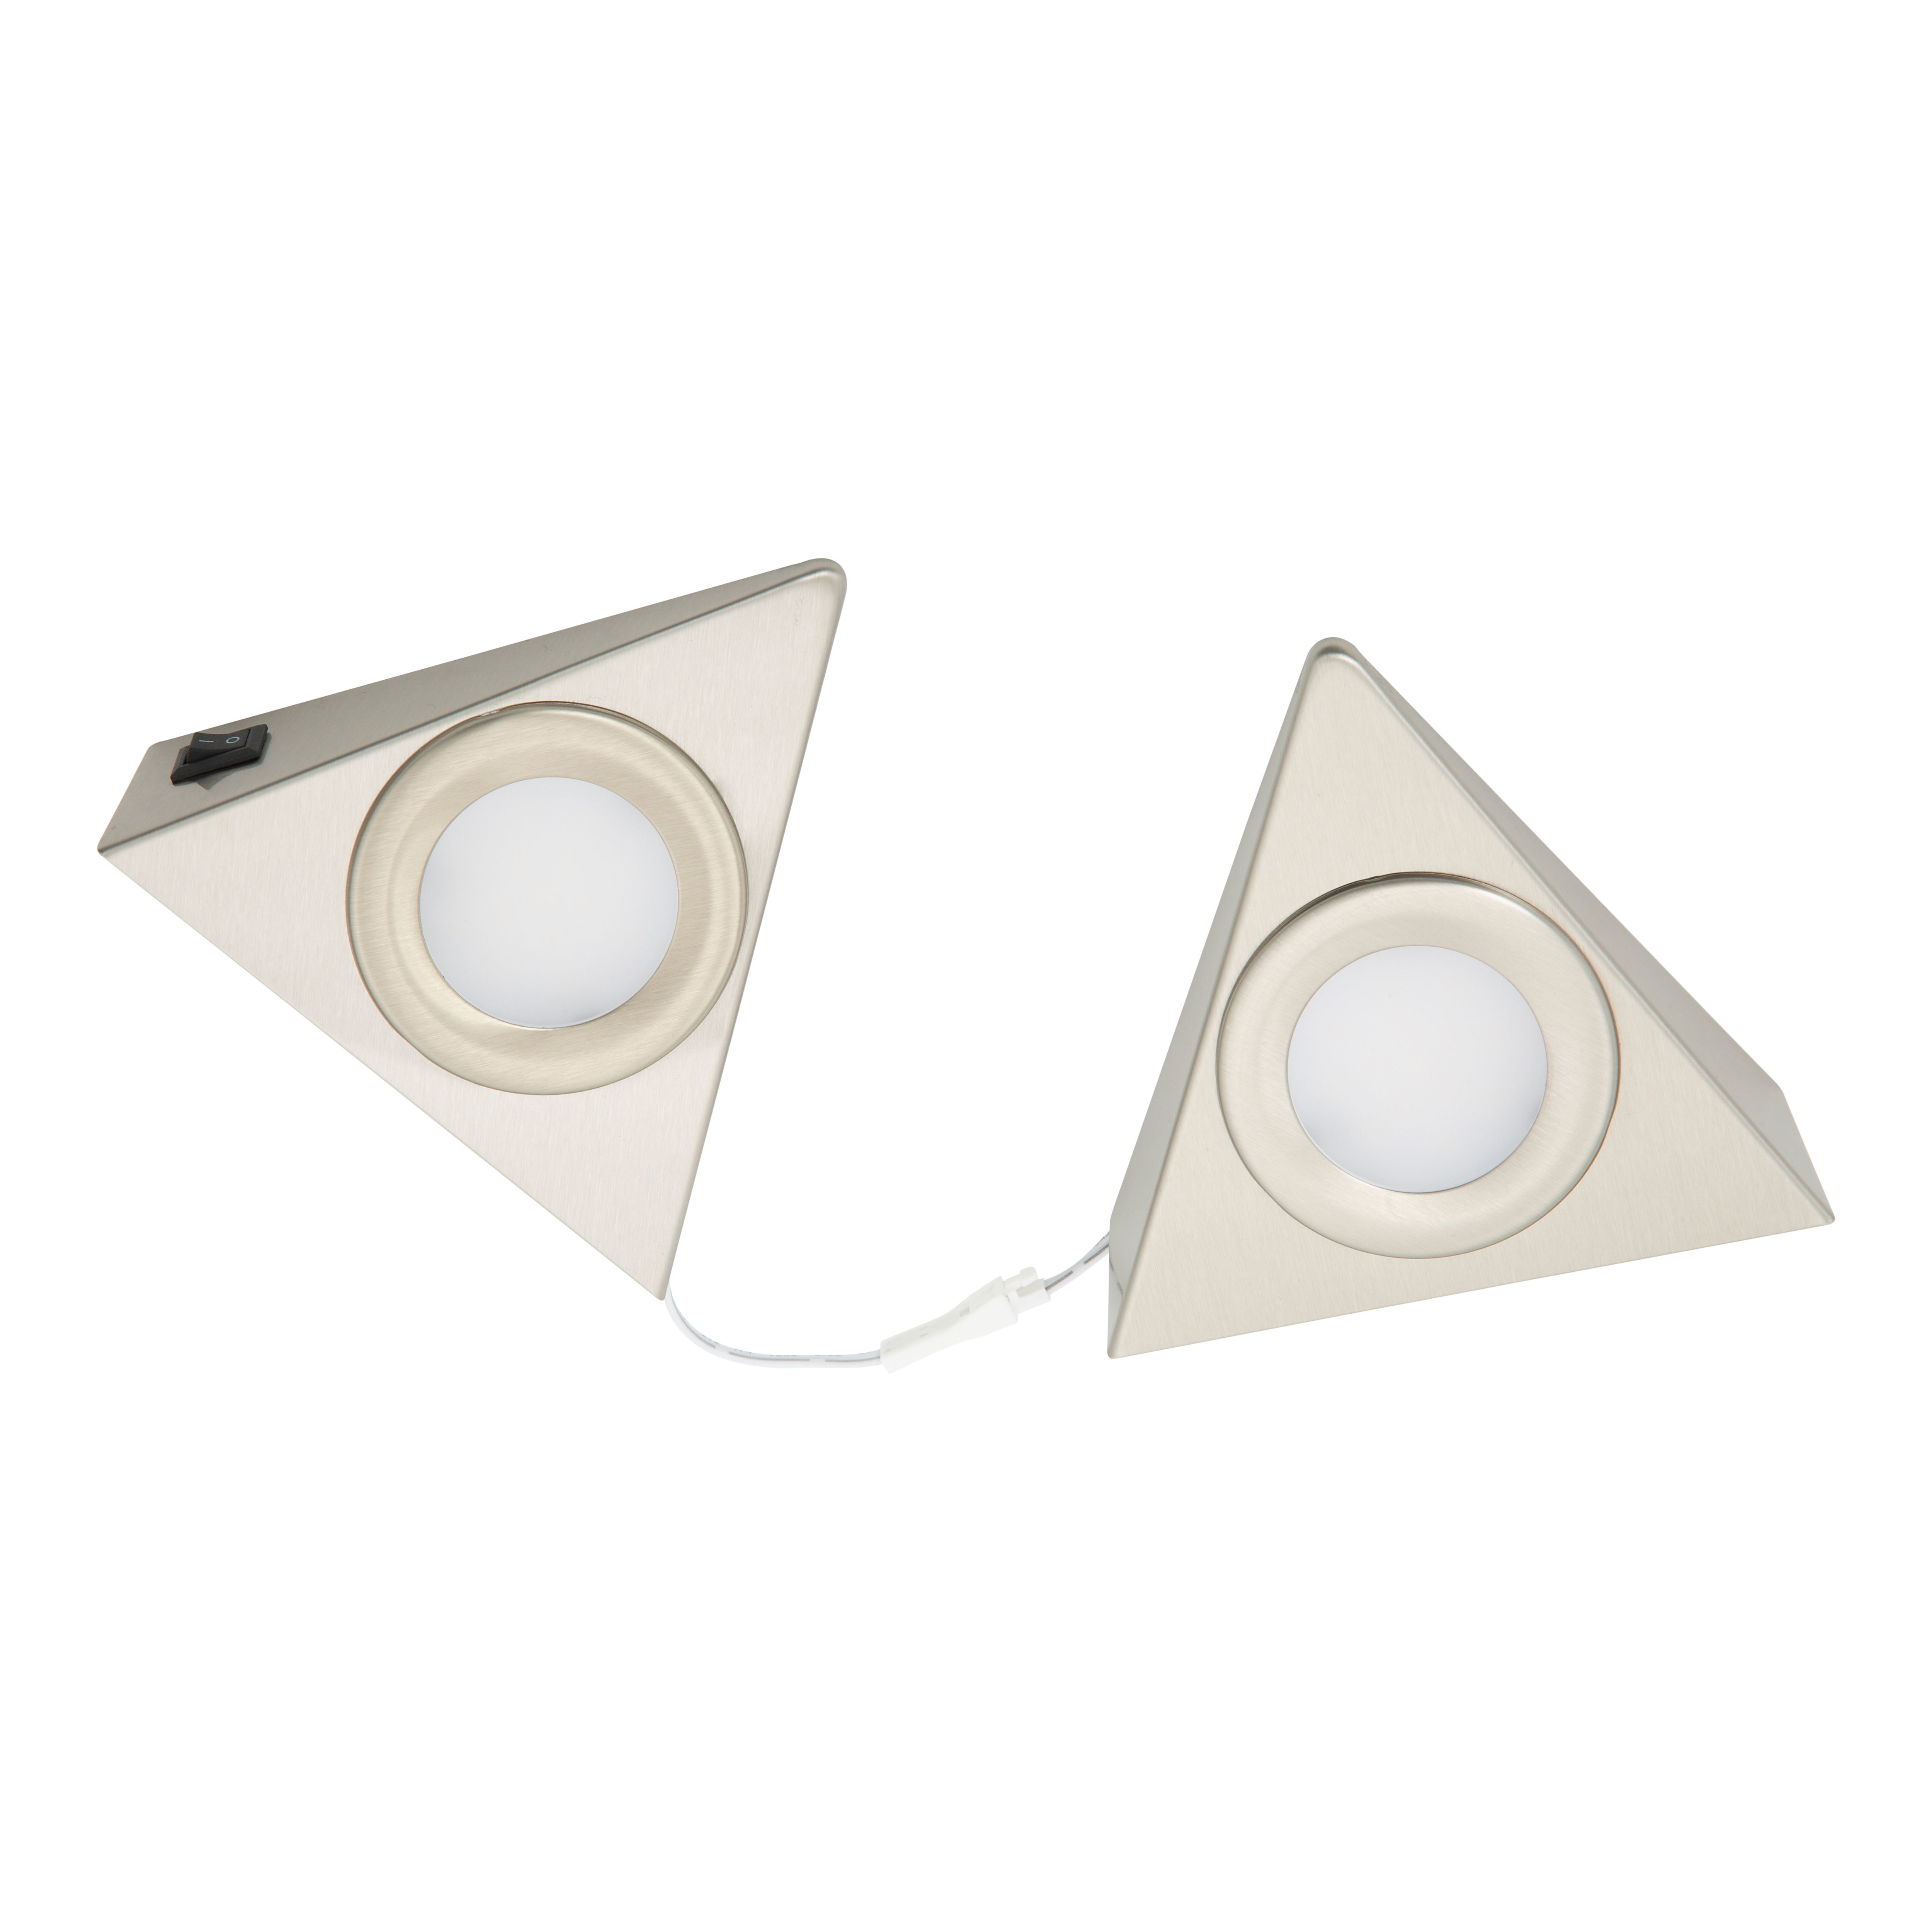 GoodHome Chardin White Silver effect Mains-powered LED Neutral white Under cabinet light IP20 (L)120mm (W)118mm